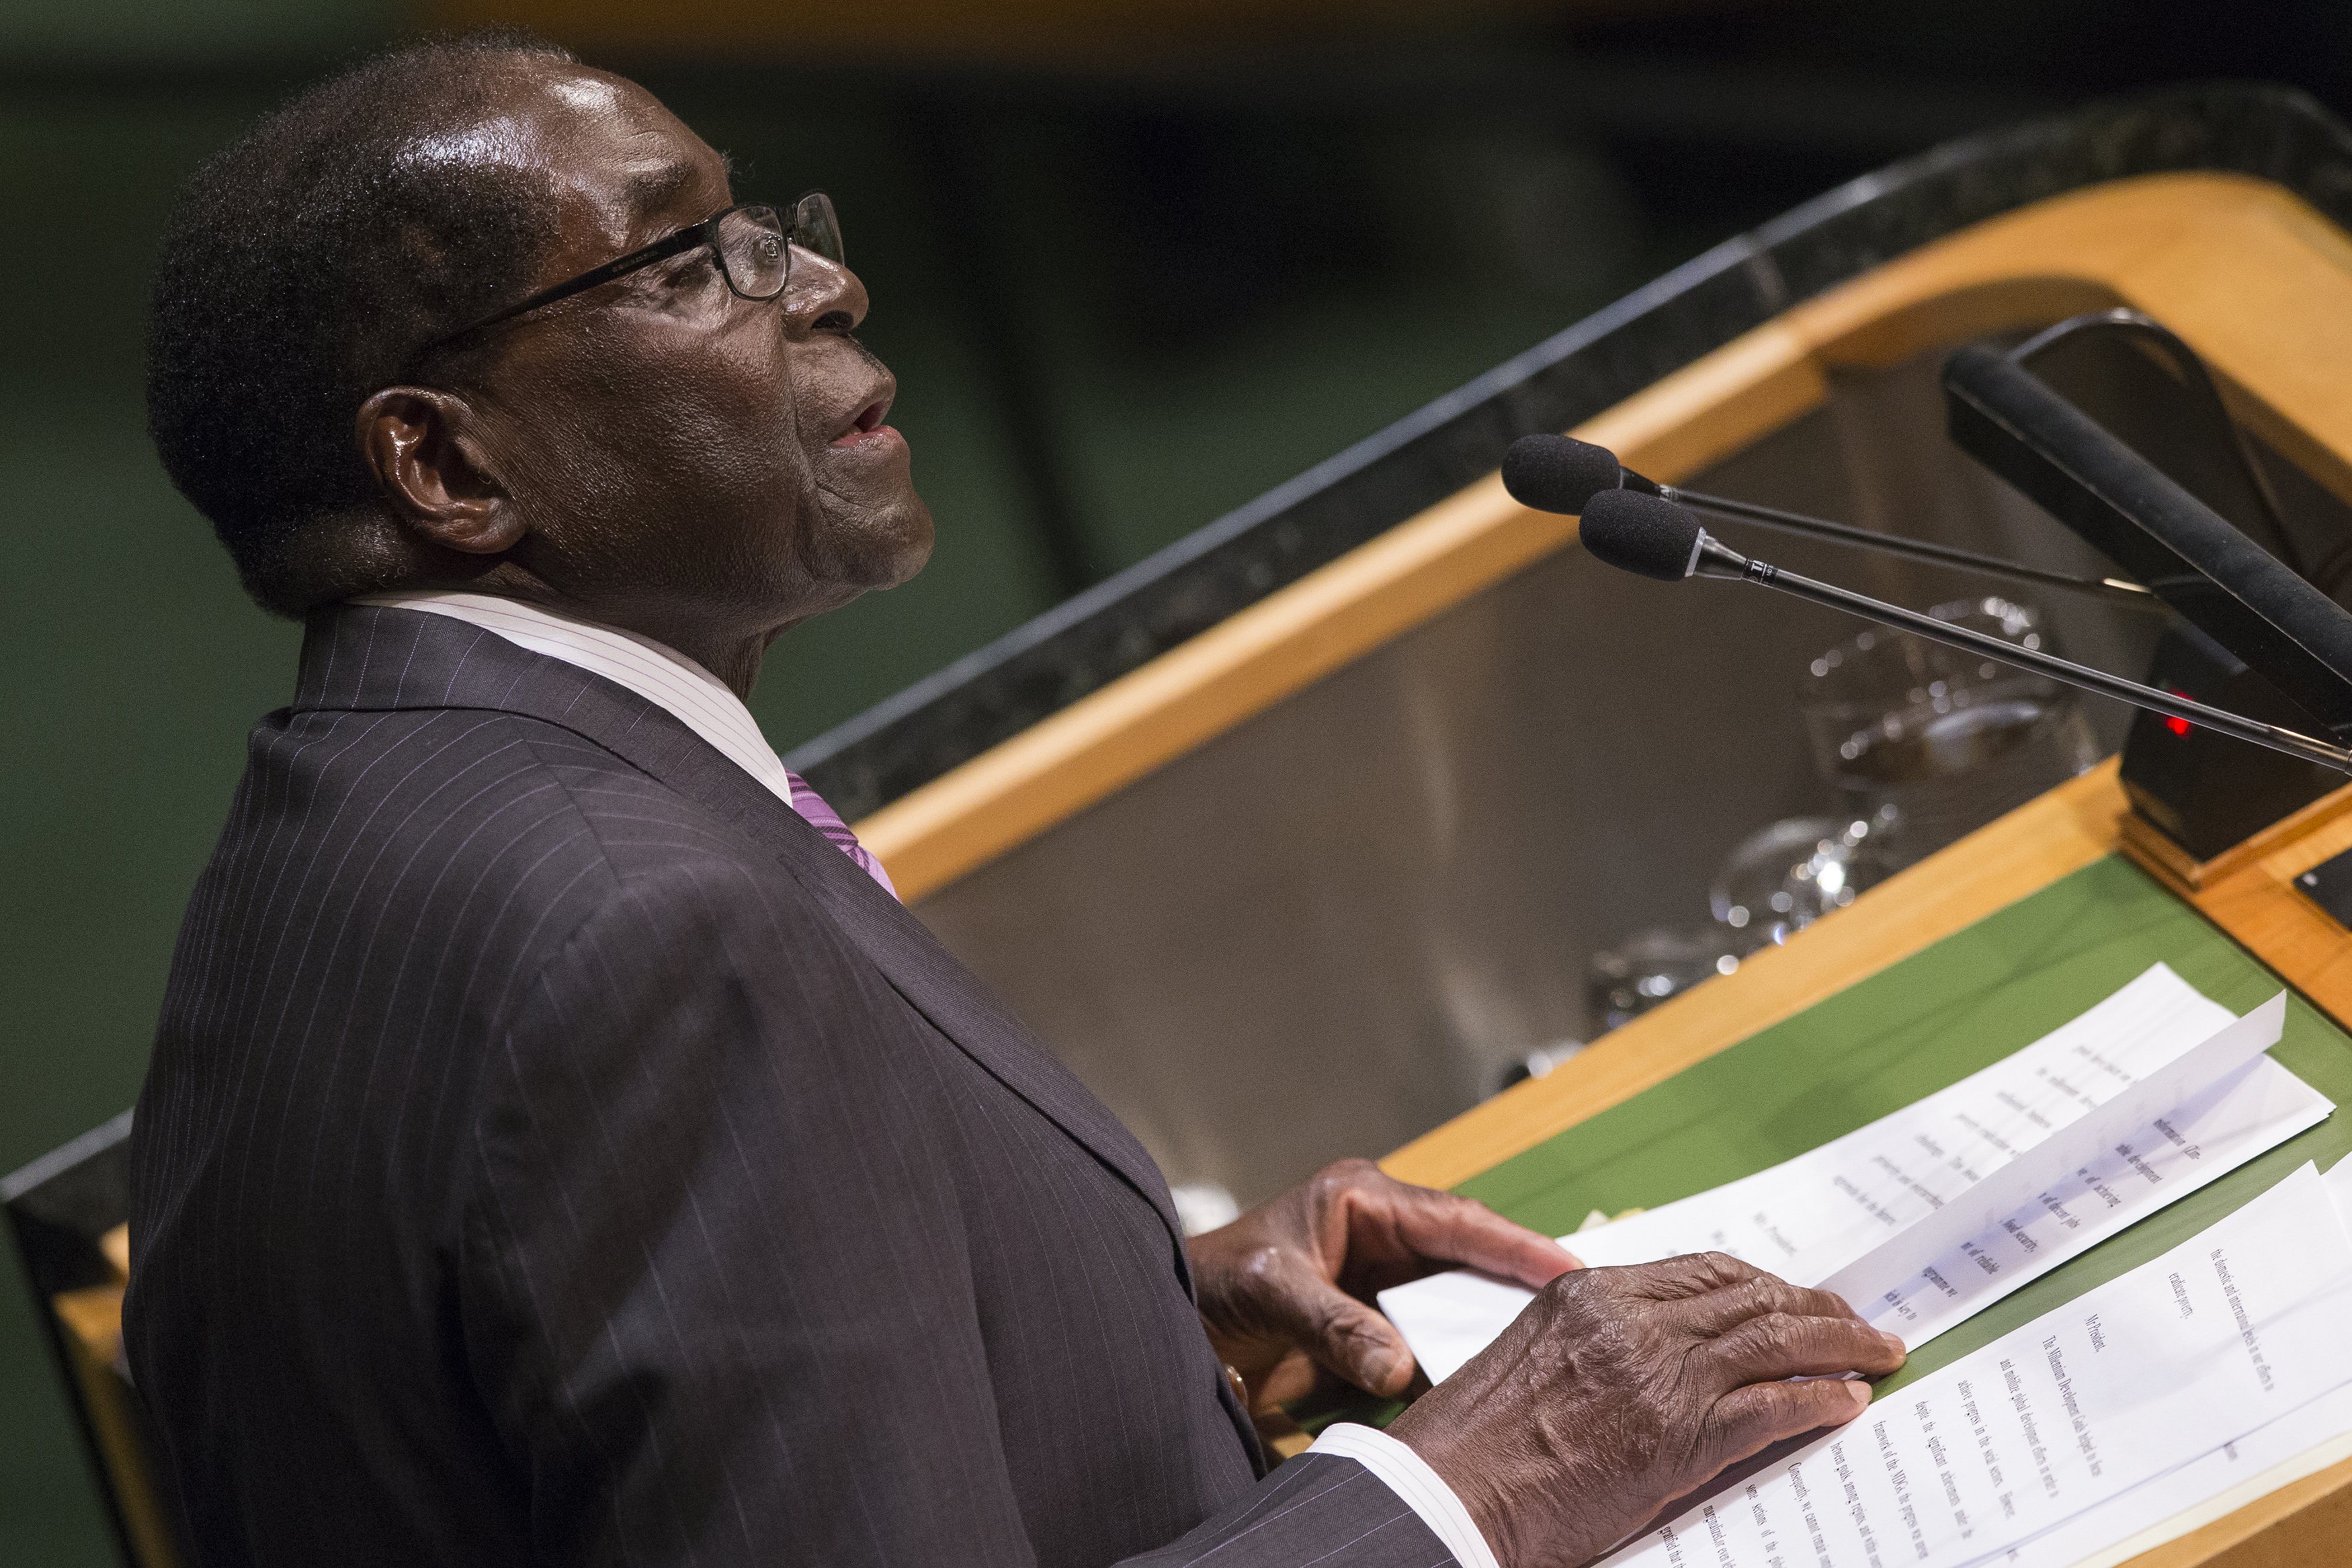 Zimbabwe's President Robert Mugabe addresses the 69th United Nations General Assembly at the United Nations Headquarters in New York September 25, 2014. (REUTERS/Adrees Latif)